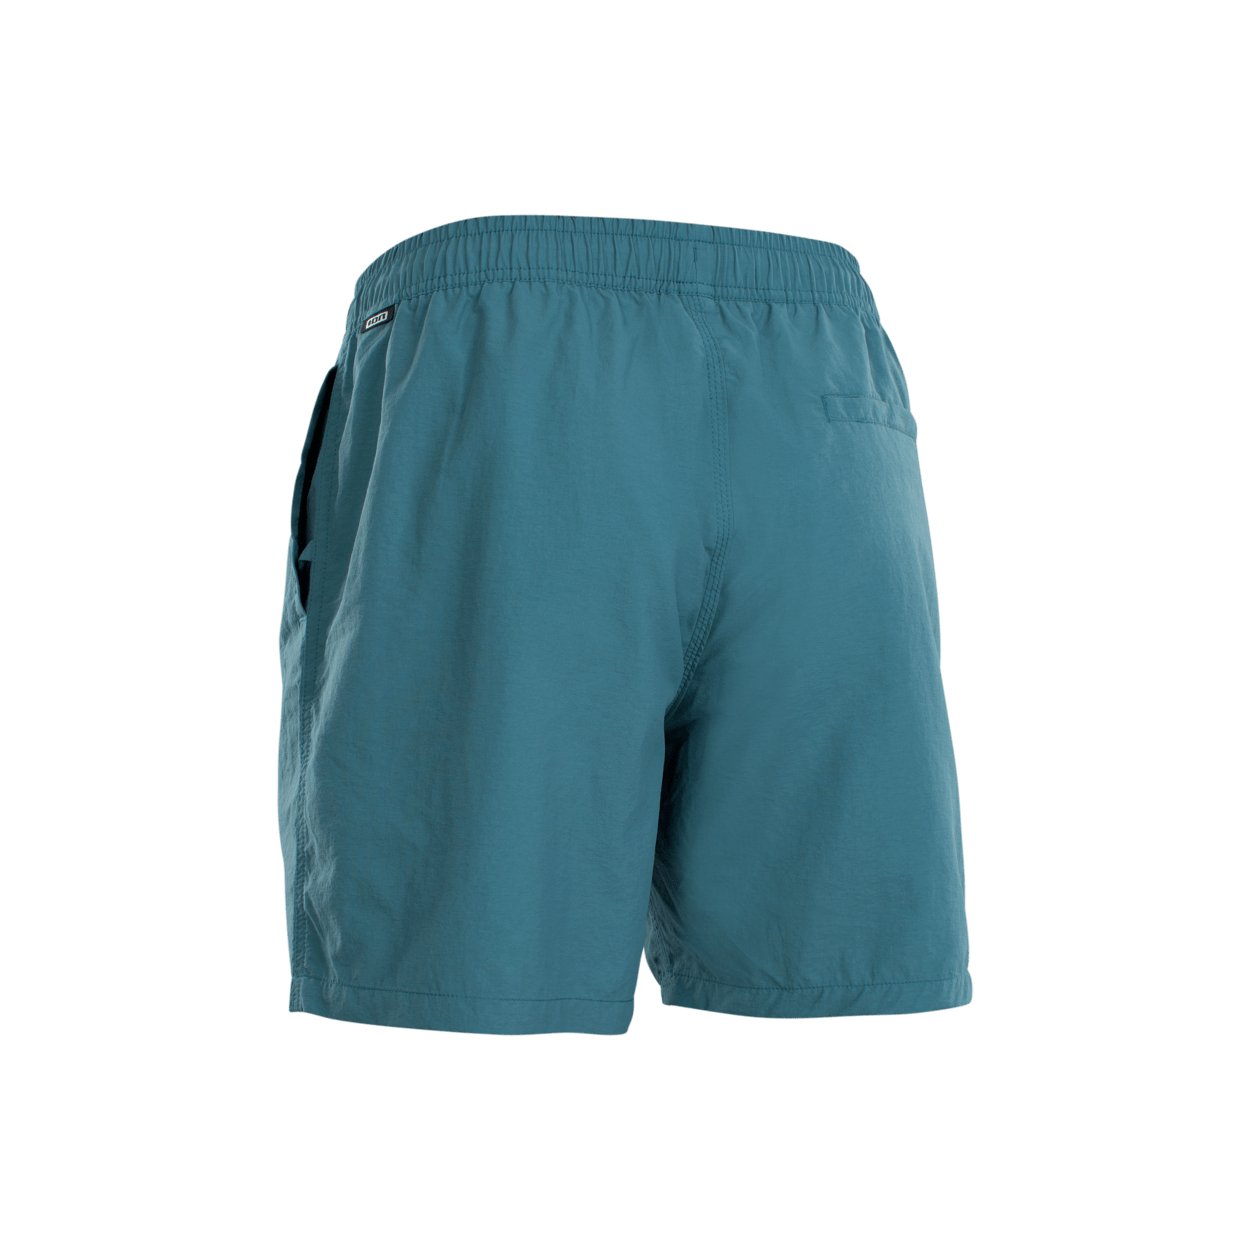 ION Men Boardshorts Volley 17" 2022 - Worthing Watersports - 9008415902644 - Apparel - ION Bike